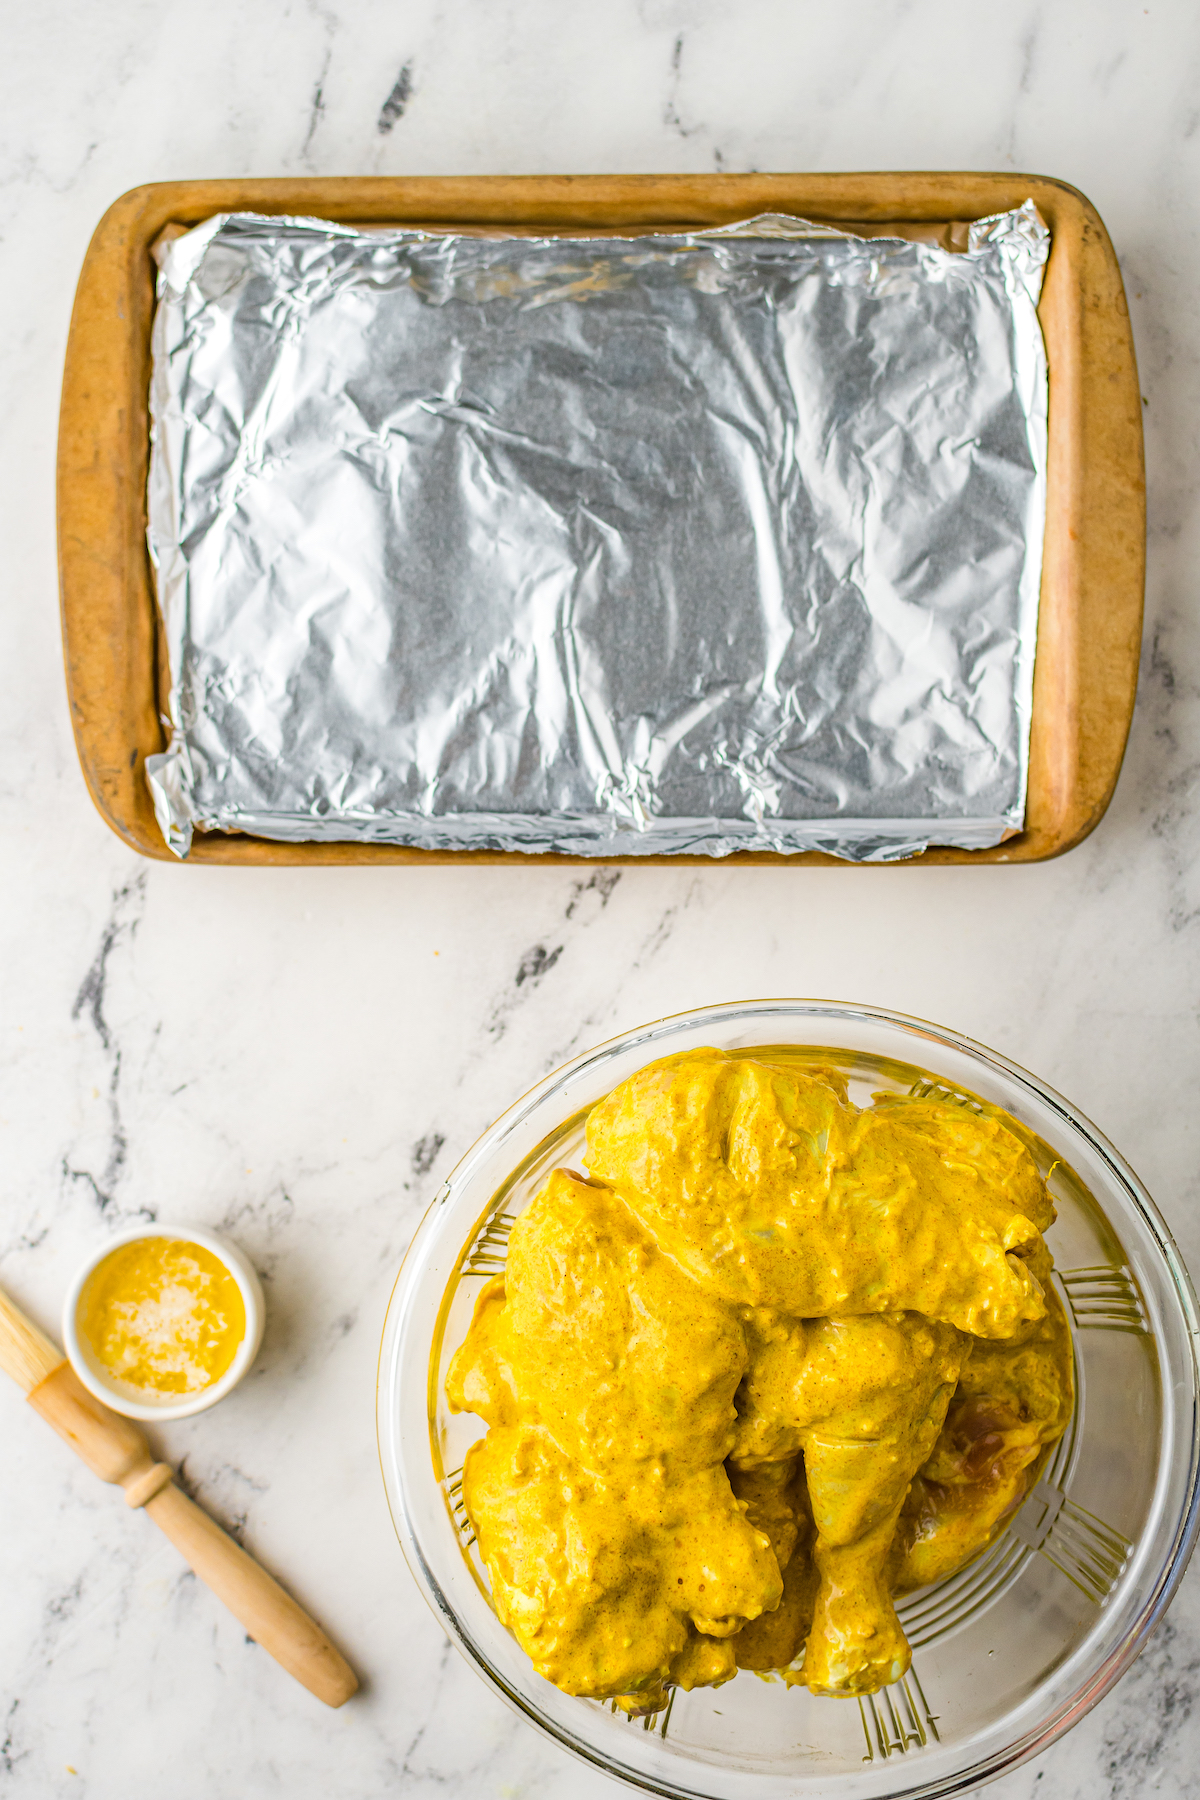 A bowl of marinated chicken next to a foil-lined baking sheet.